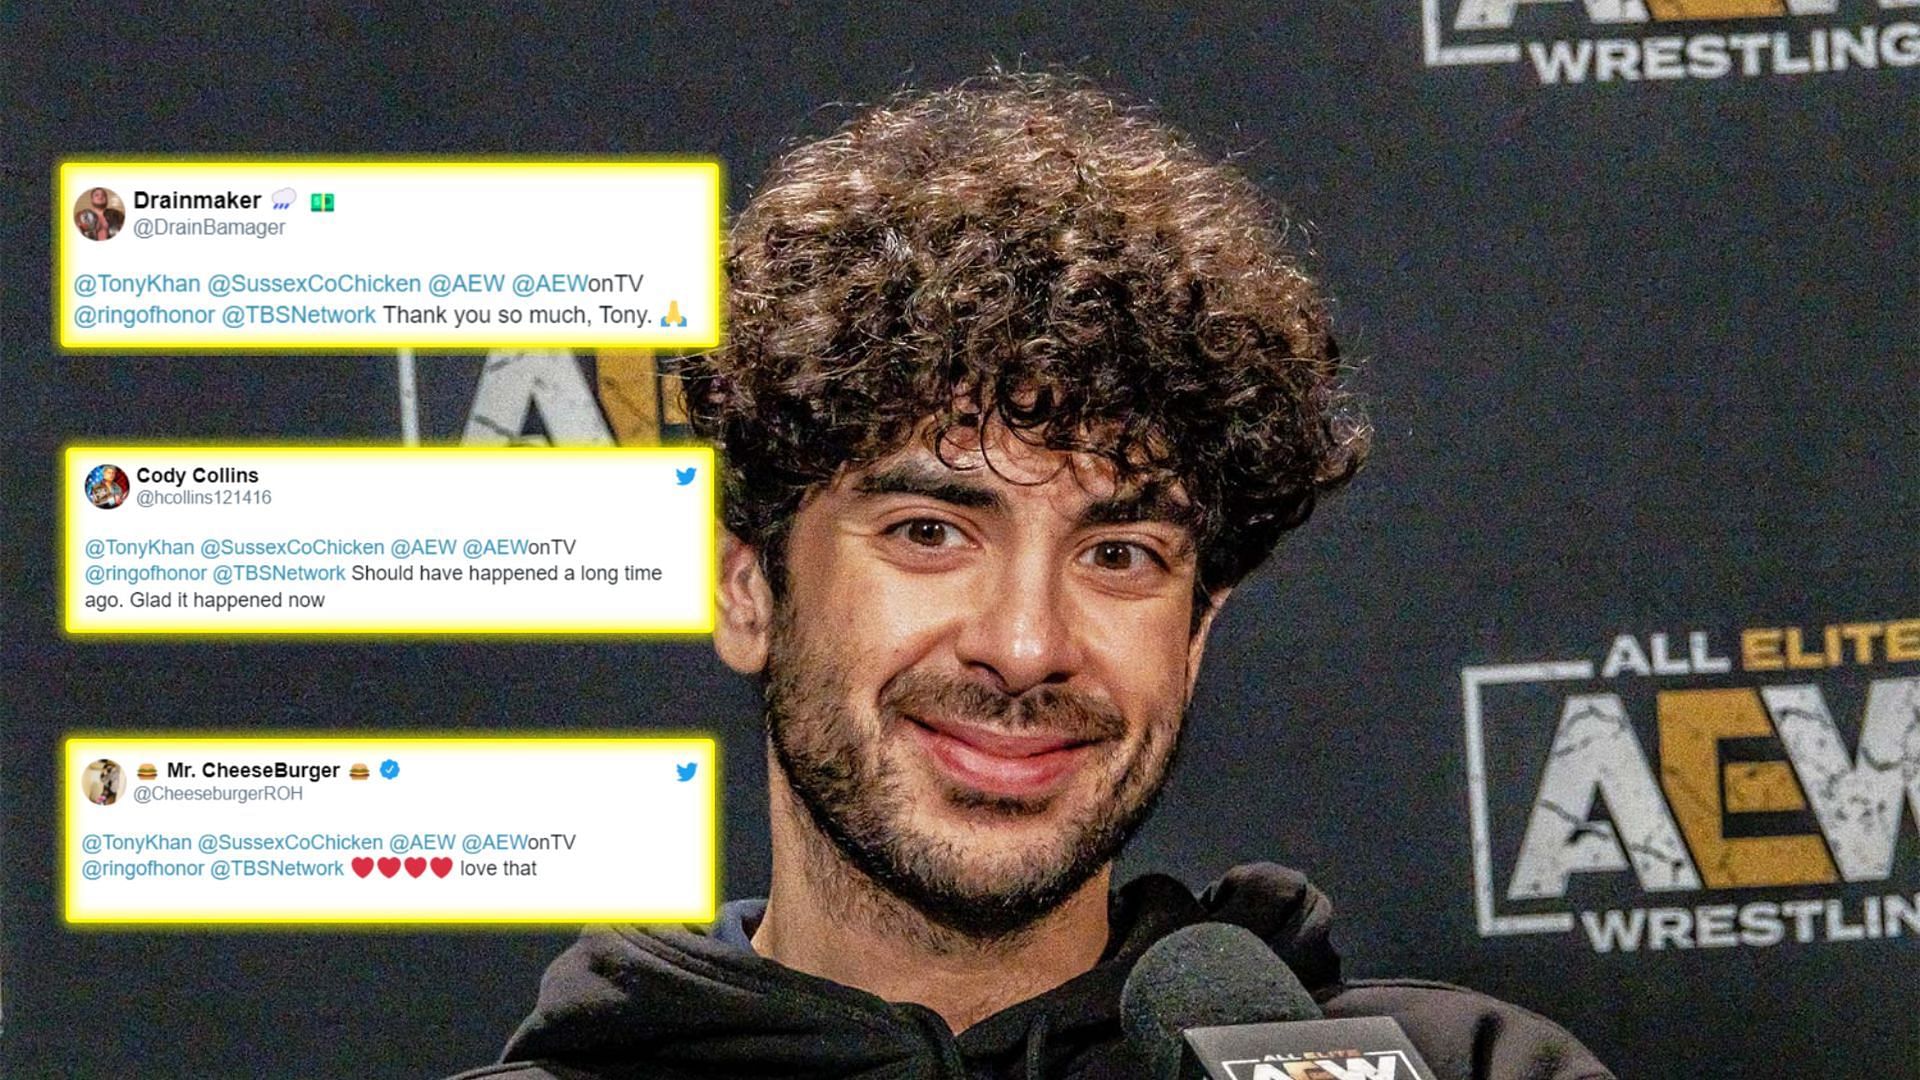 Tony Khan has expanded his roster of talent